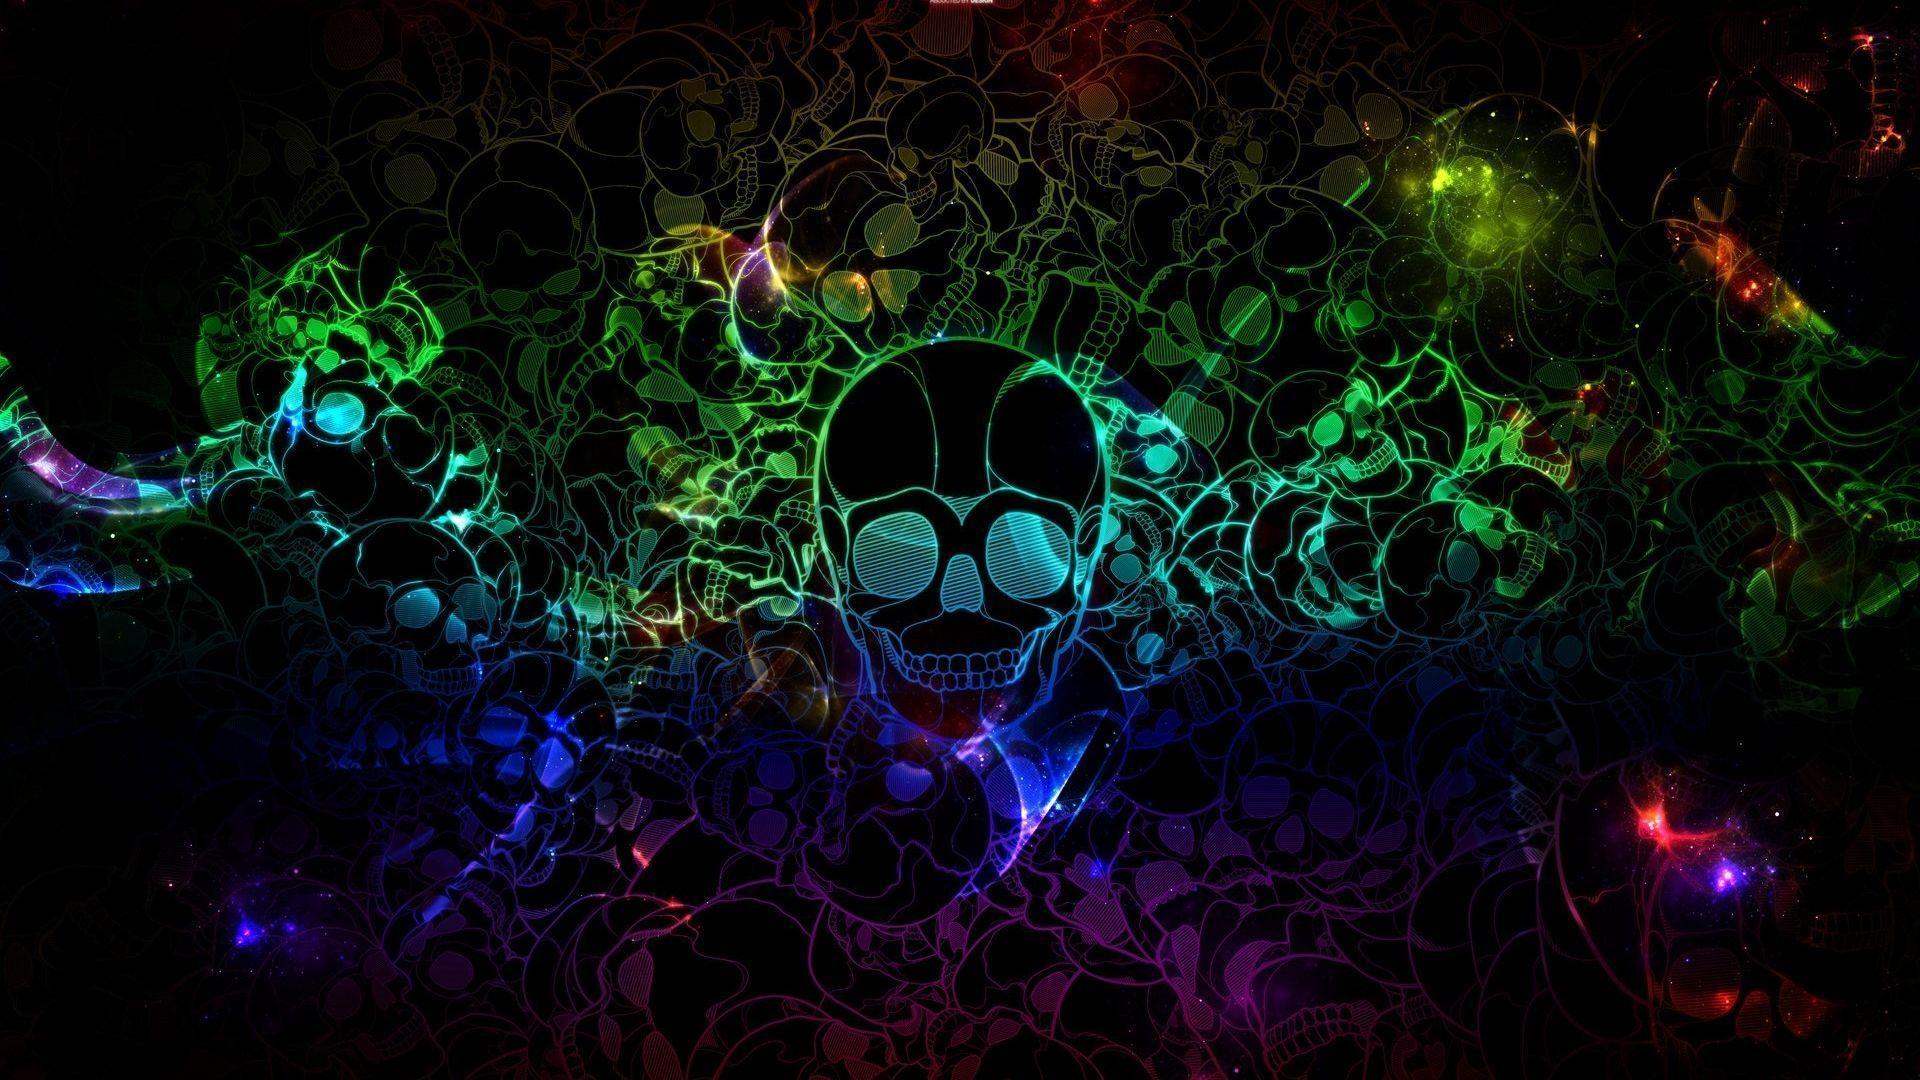 59 entries in Skull Wallpapers Free Download group